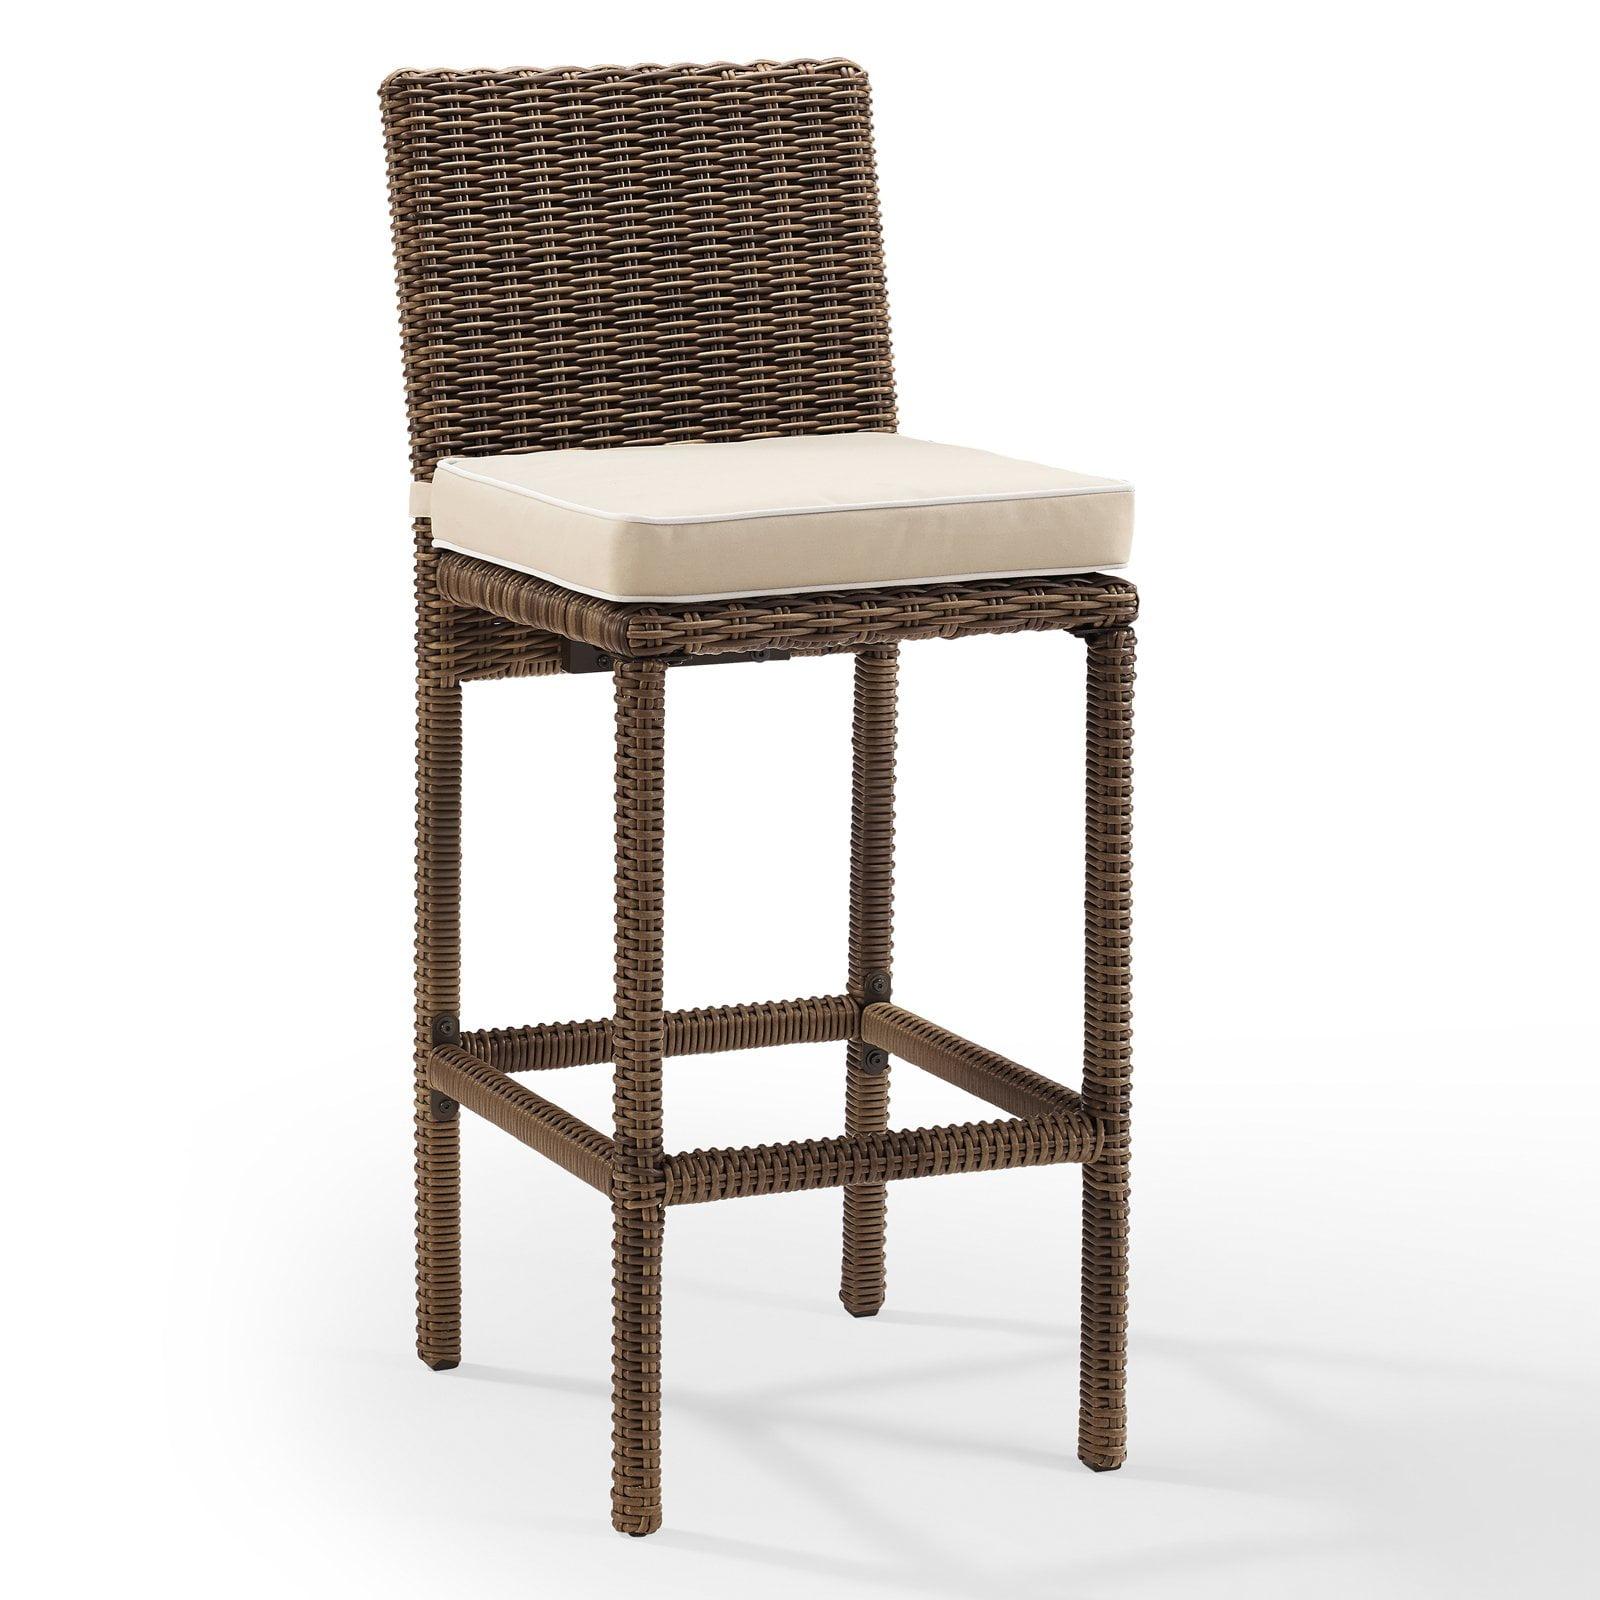 All-Weather Wicker 46'' Sand Bar Height Stools Set of 2